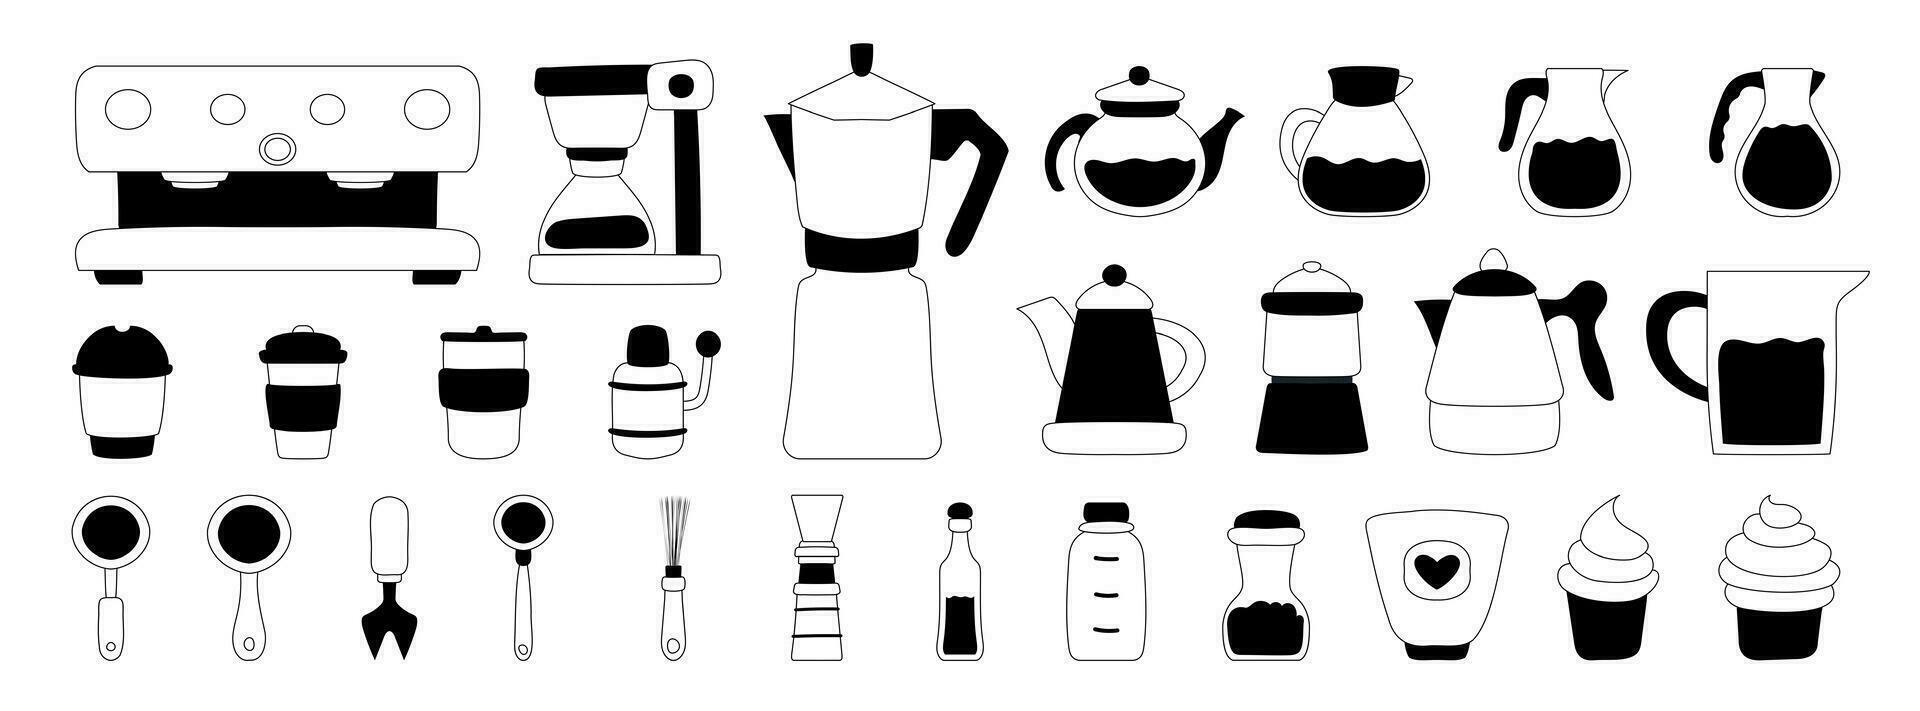 Set of black icons on white background for coffee shop and barista. Coffee machines, cups, paper cups, teapots with coffee, jugs with milk, cakes and chocolate, coffee and chocolate beans. vector